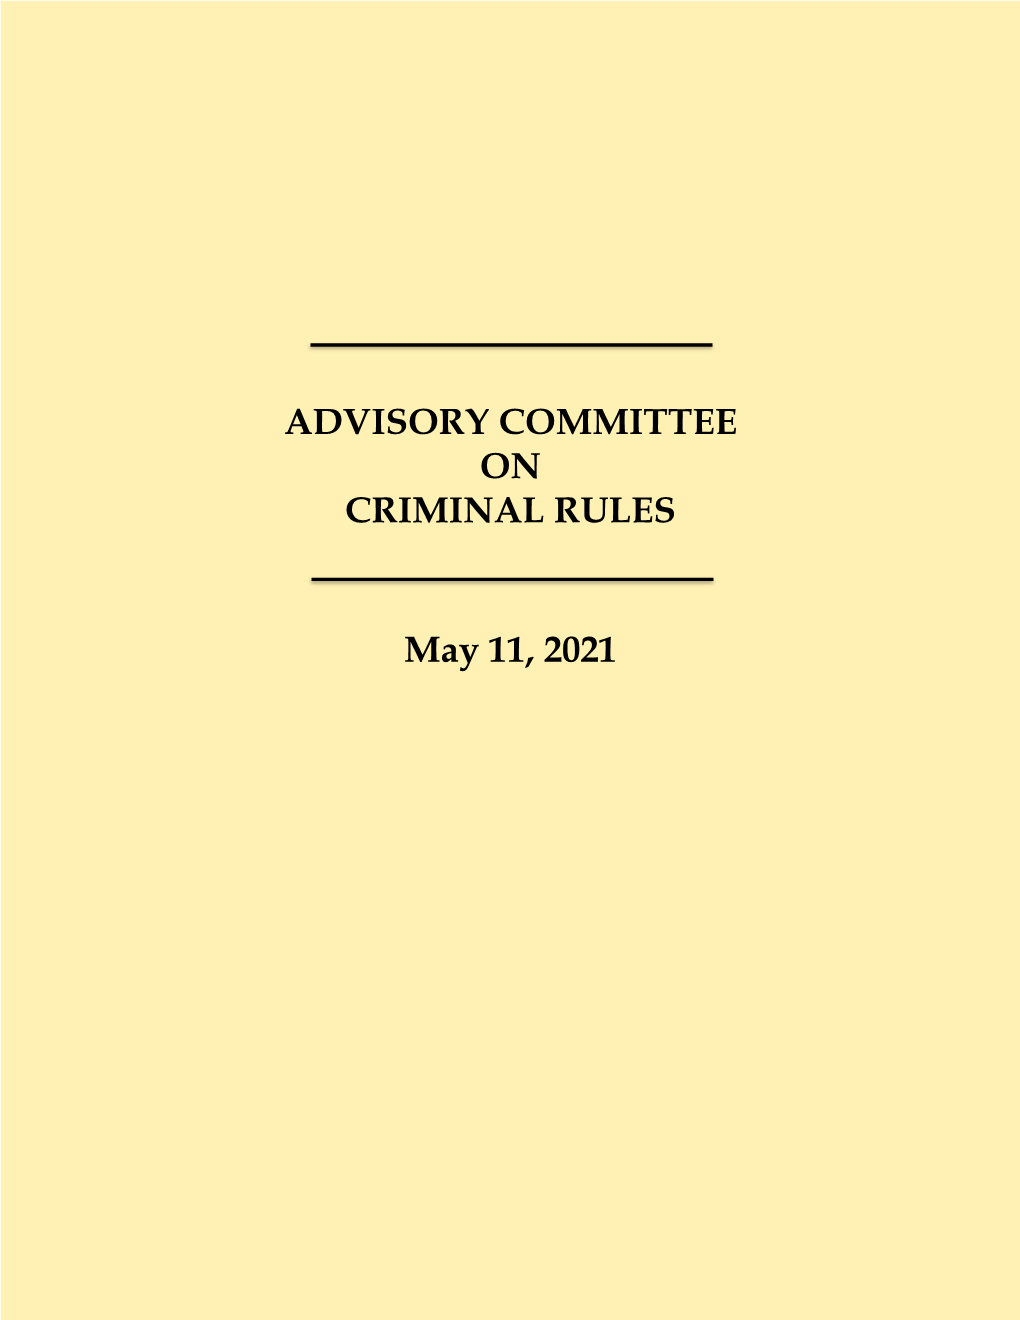 Advisory Committee on Criminal Rules May 11, 2021